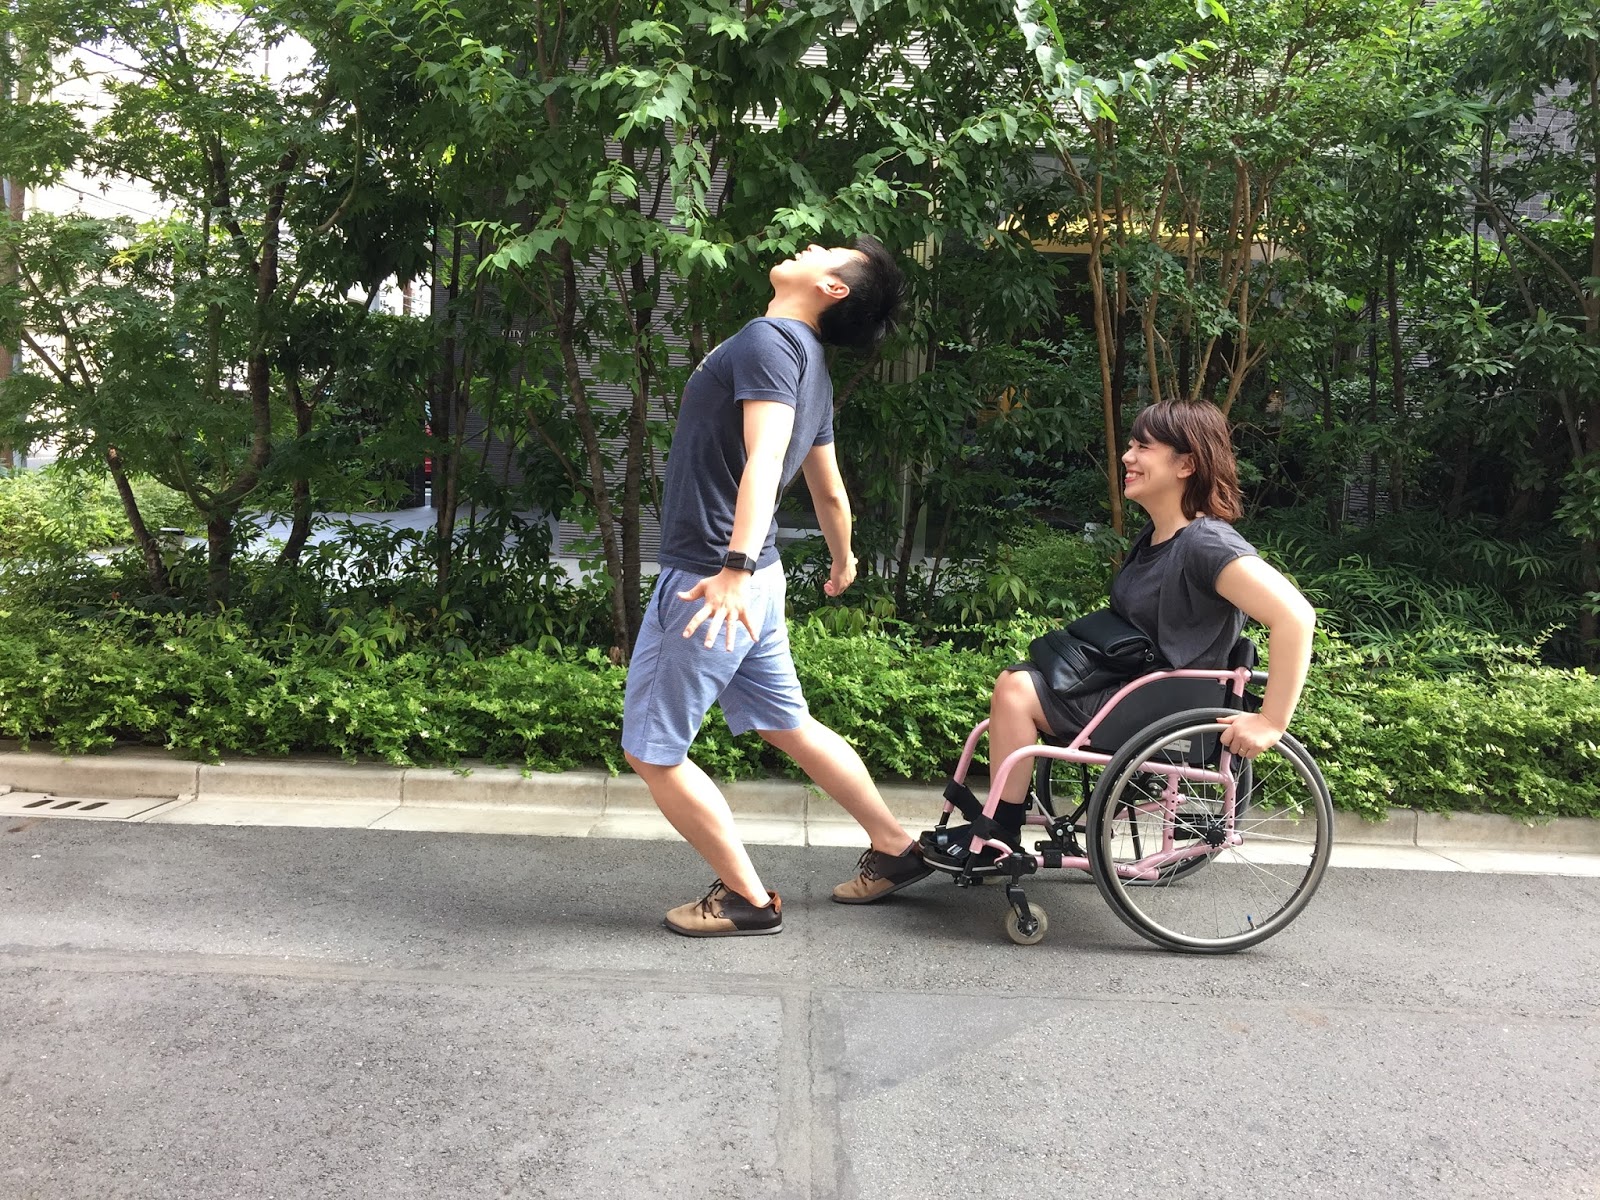 Where Should I Stand When Walking With a Wheelchair User